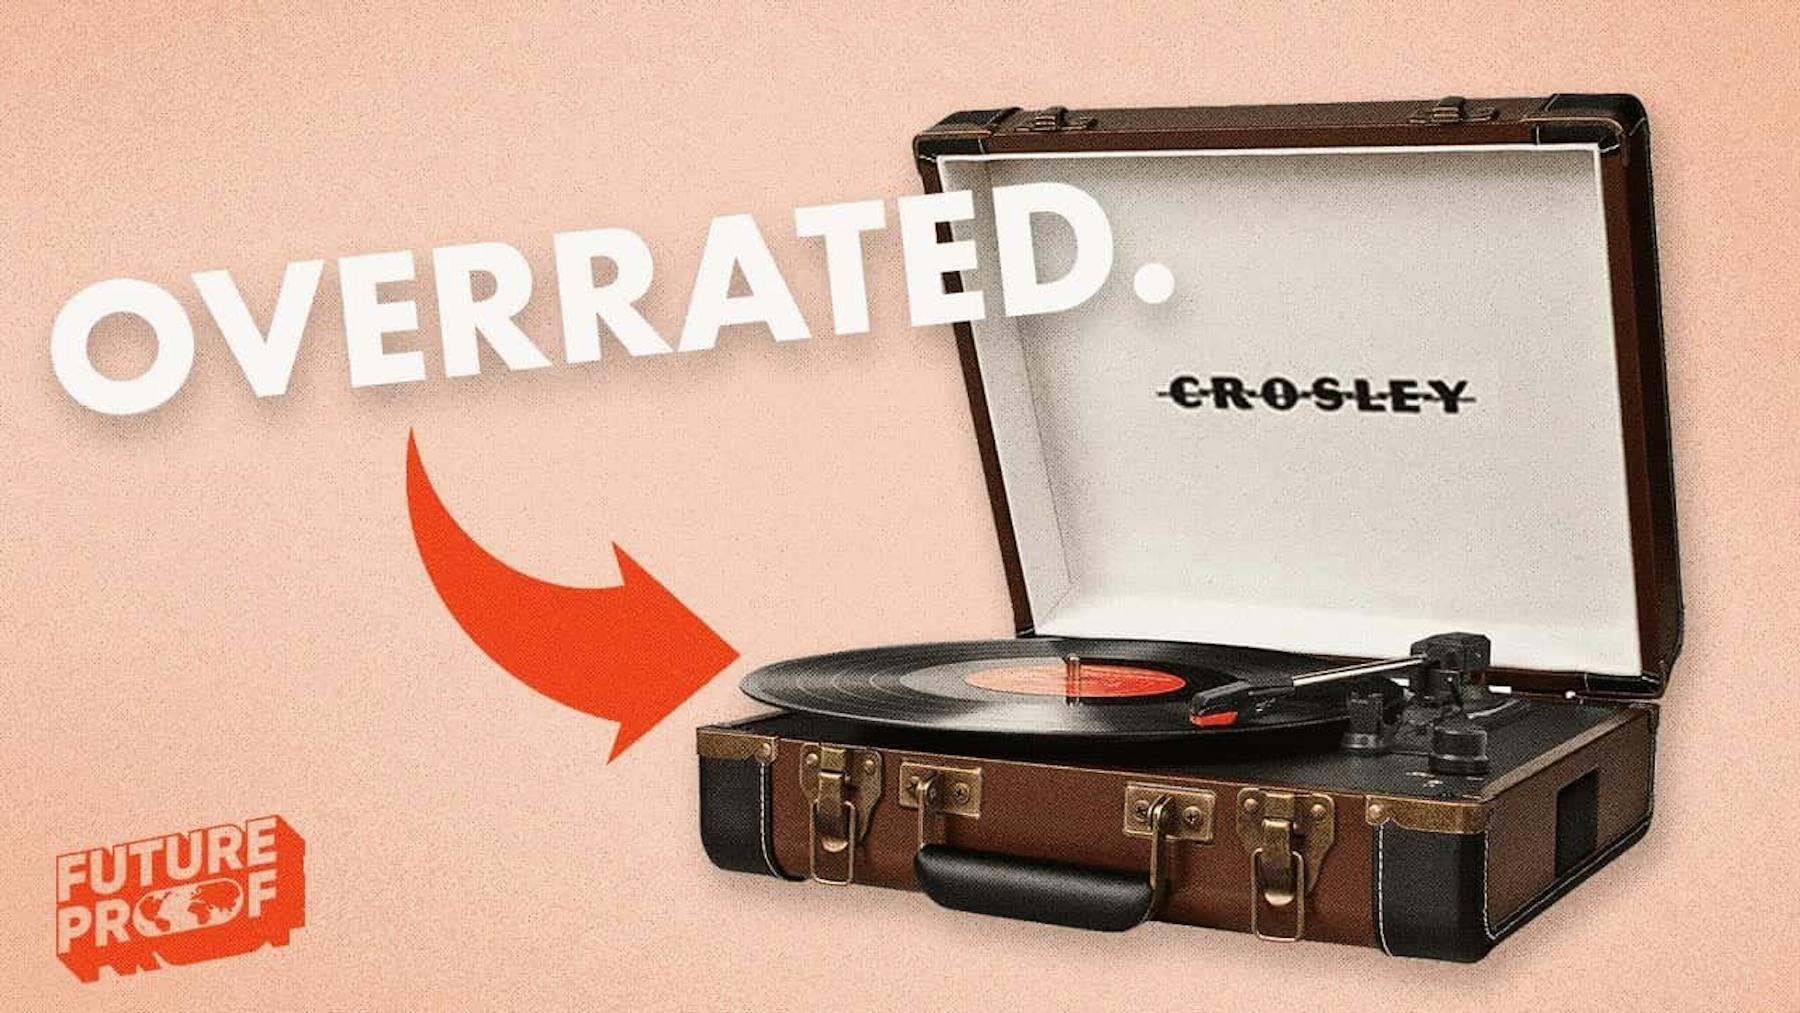 record players overrated?